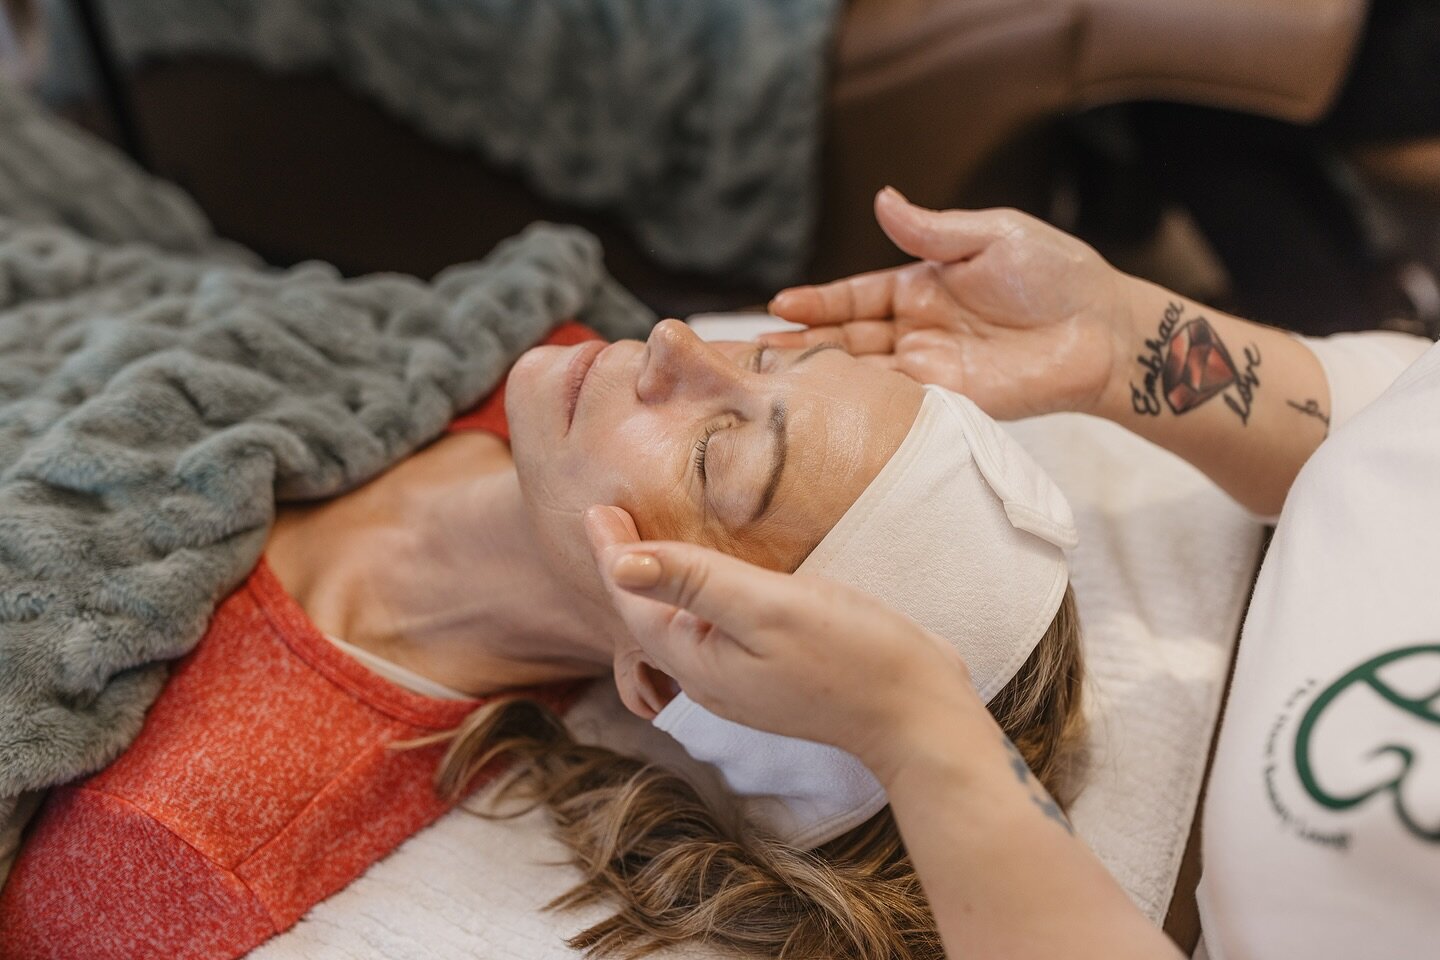 Don&rsquo;t Miss Out: Limited-Time Clean Beauty Facial Offer!

Experience the luxury of a 30-minute Clean Beauty Facial at The Nest Beauty Lounge inside @wrenandwild for only $50, a significant drop from the regular $89 price! 

@thenestbeautylounge 